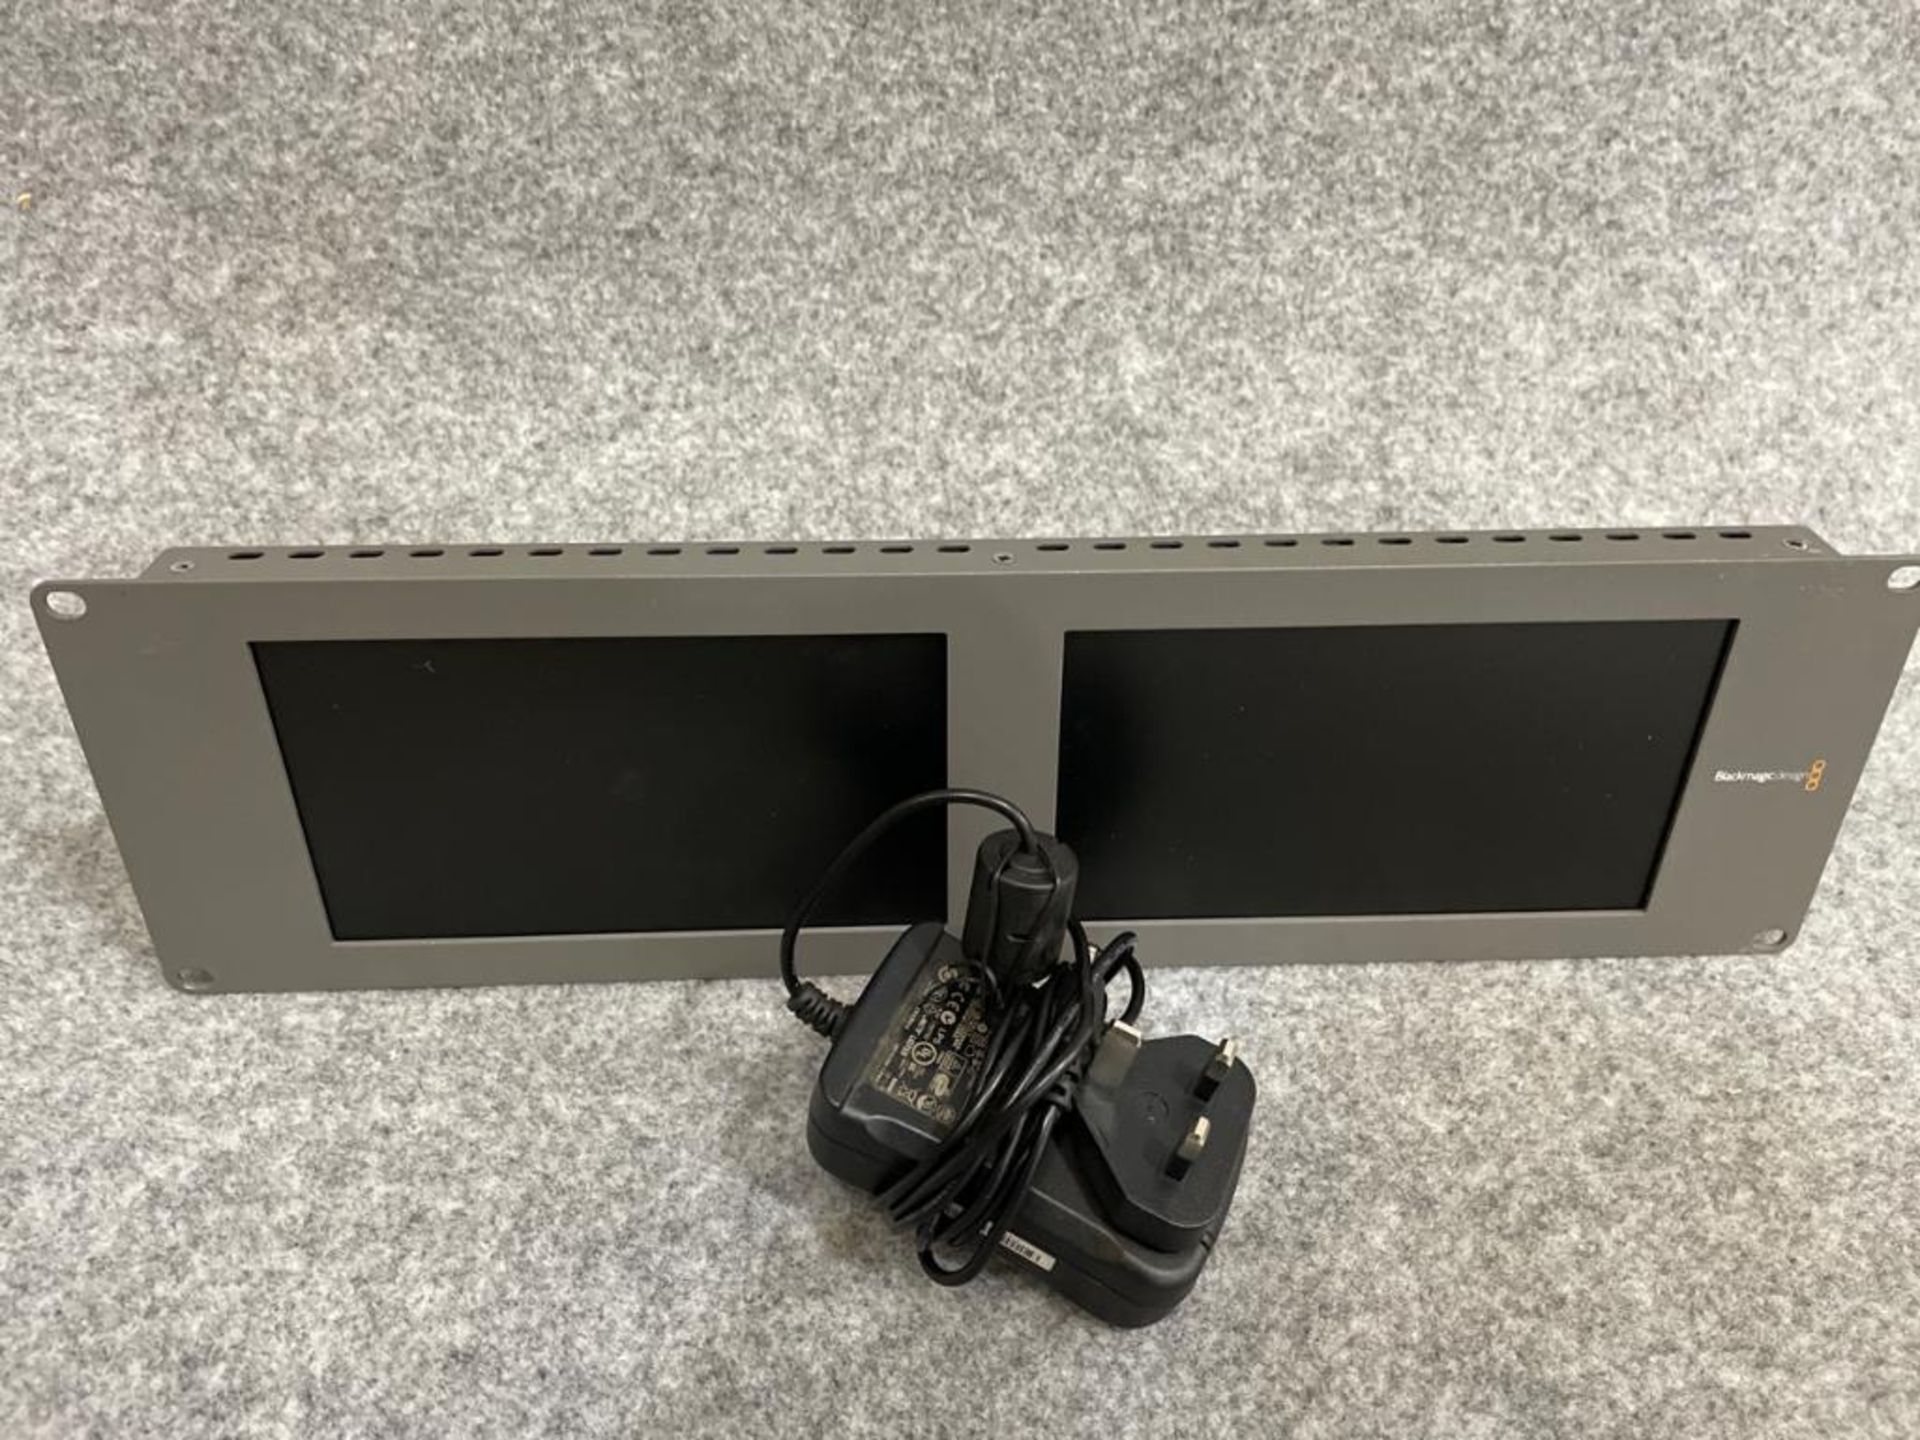 BlackMagic Dual HD Monitor with power supply SN: 1391770 - Image 3 of 3